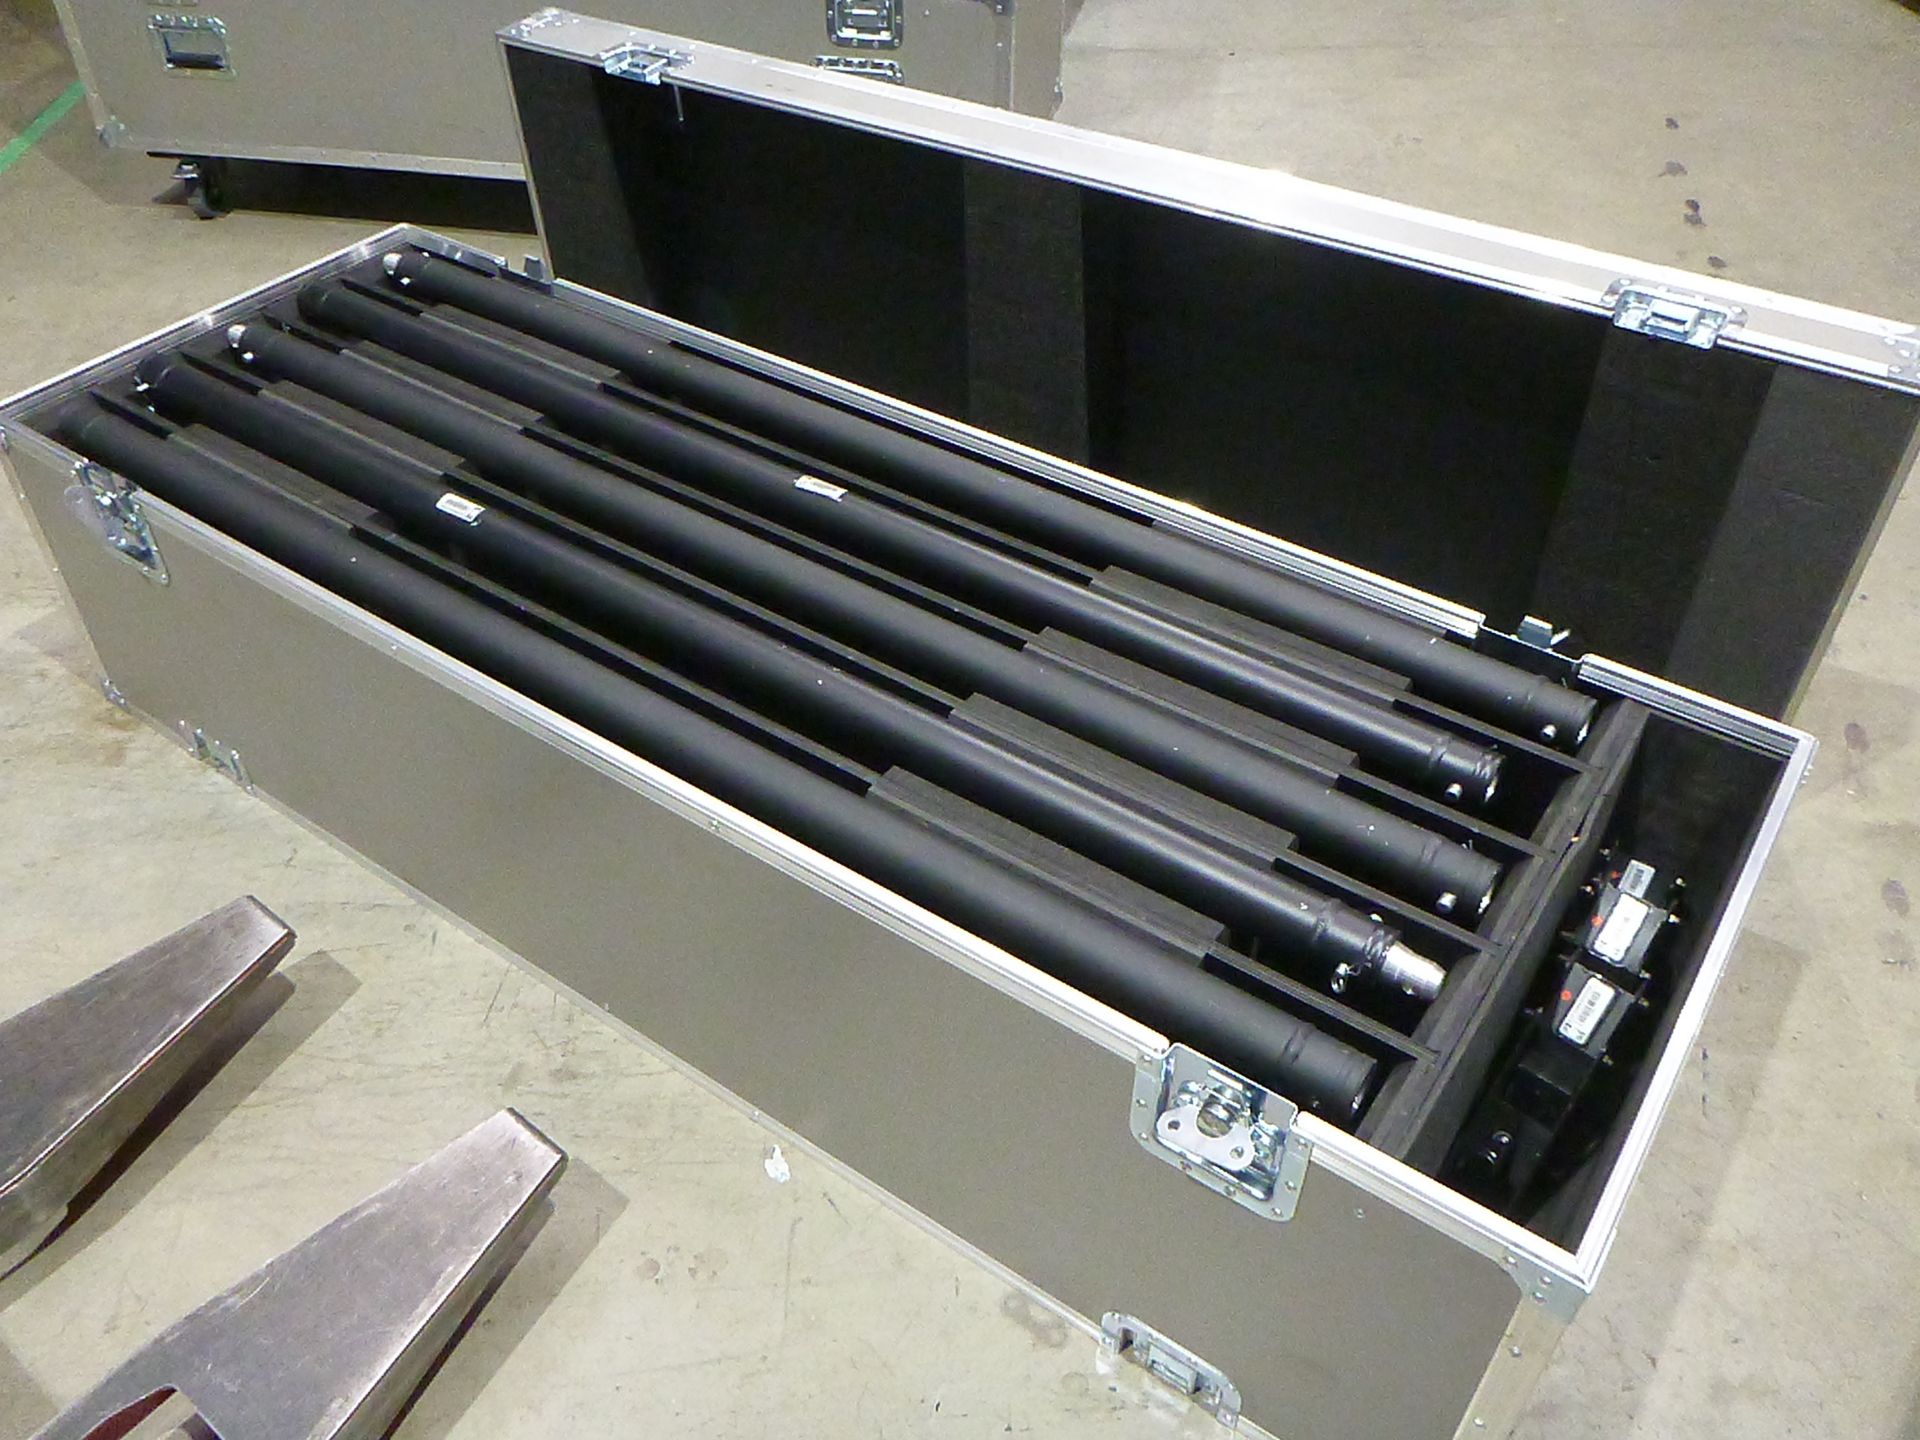 DigiLED X-Tek 2600i Ground Support Uprights 1500 mm triple panel, Qty 10 including couplers, In